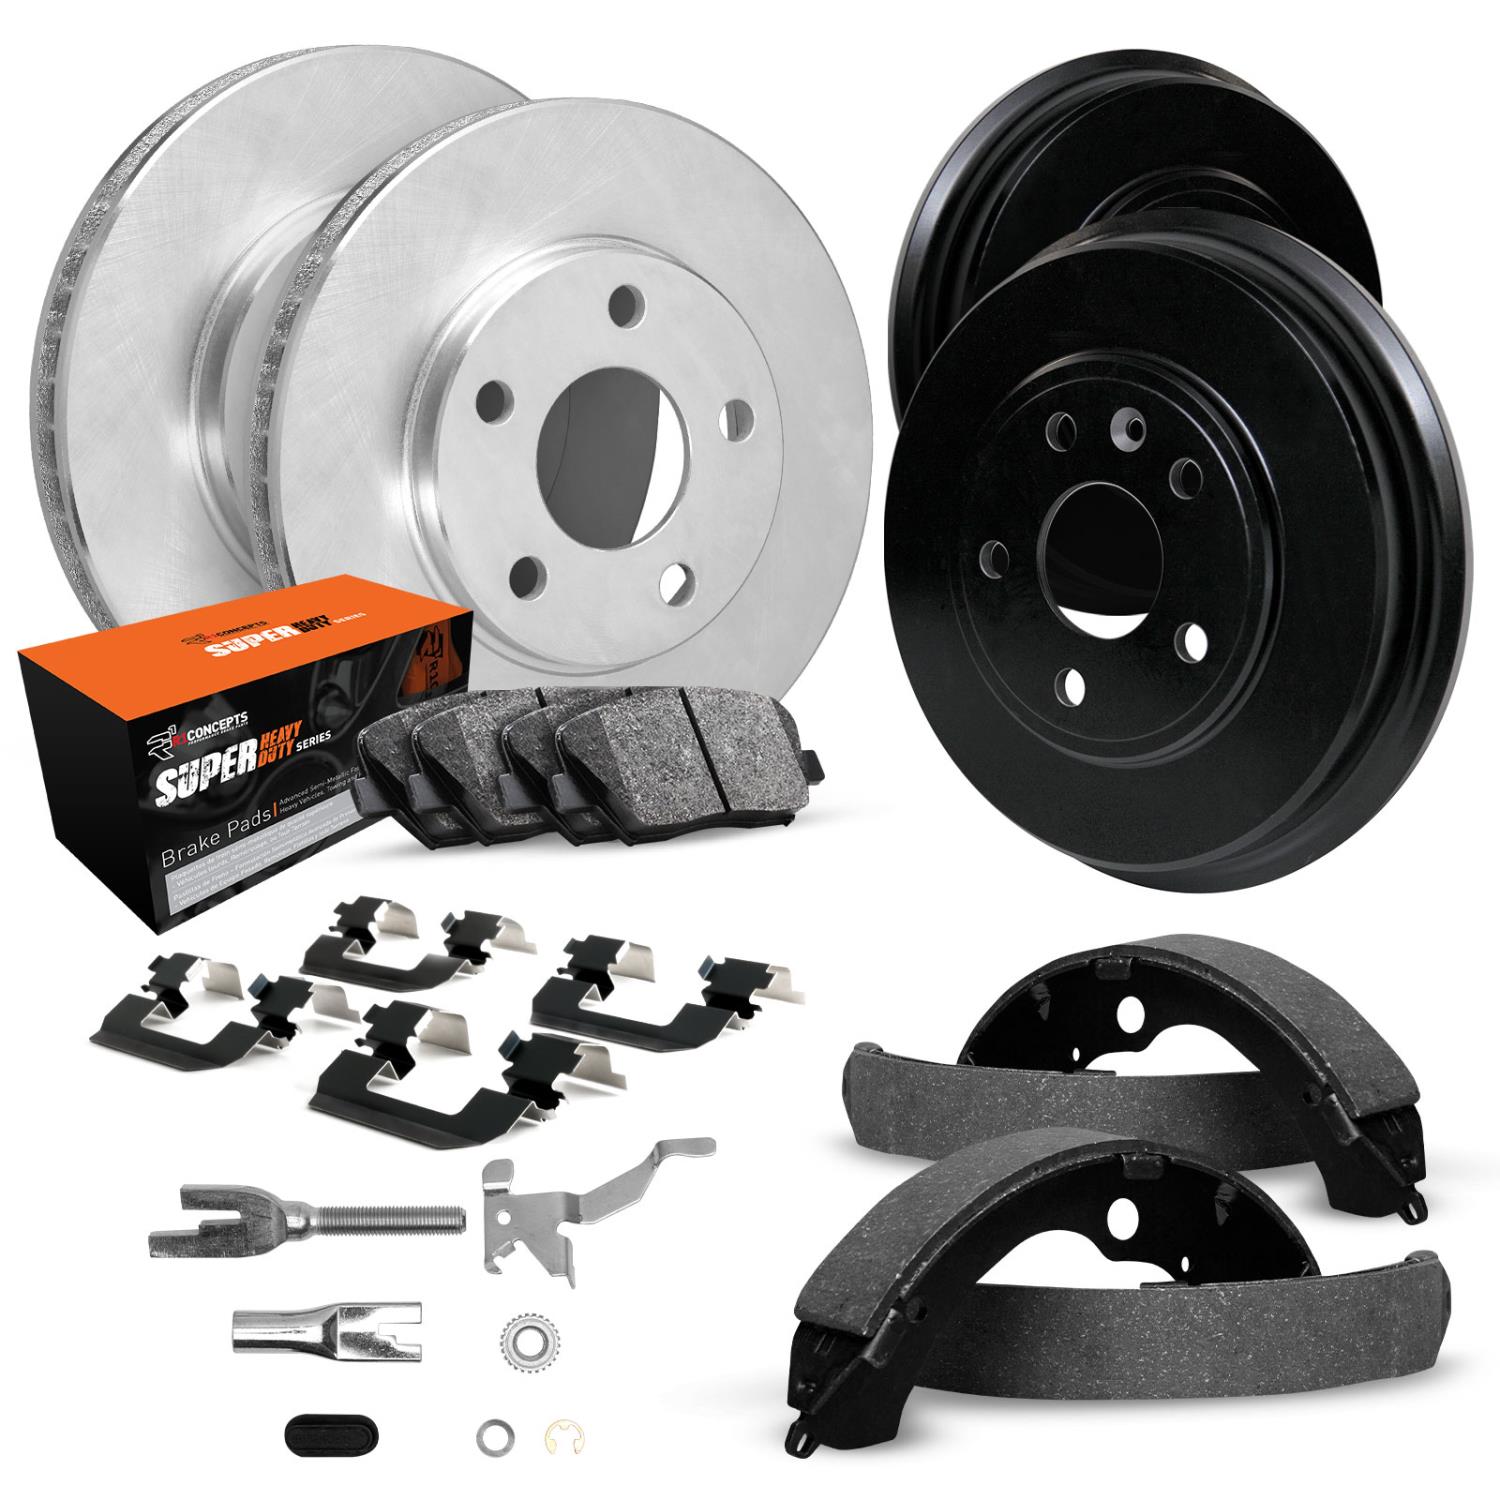 E-Line Blank Brake Rotor & Drum Set w/Super-Duty Pads, Shoes, Hardware, & Adjusters, 2001-2002 GM, Position: Front & Rear